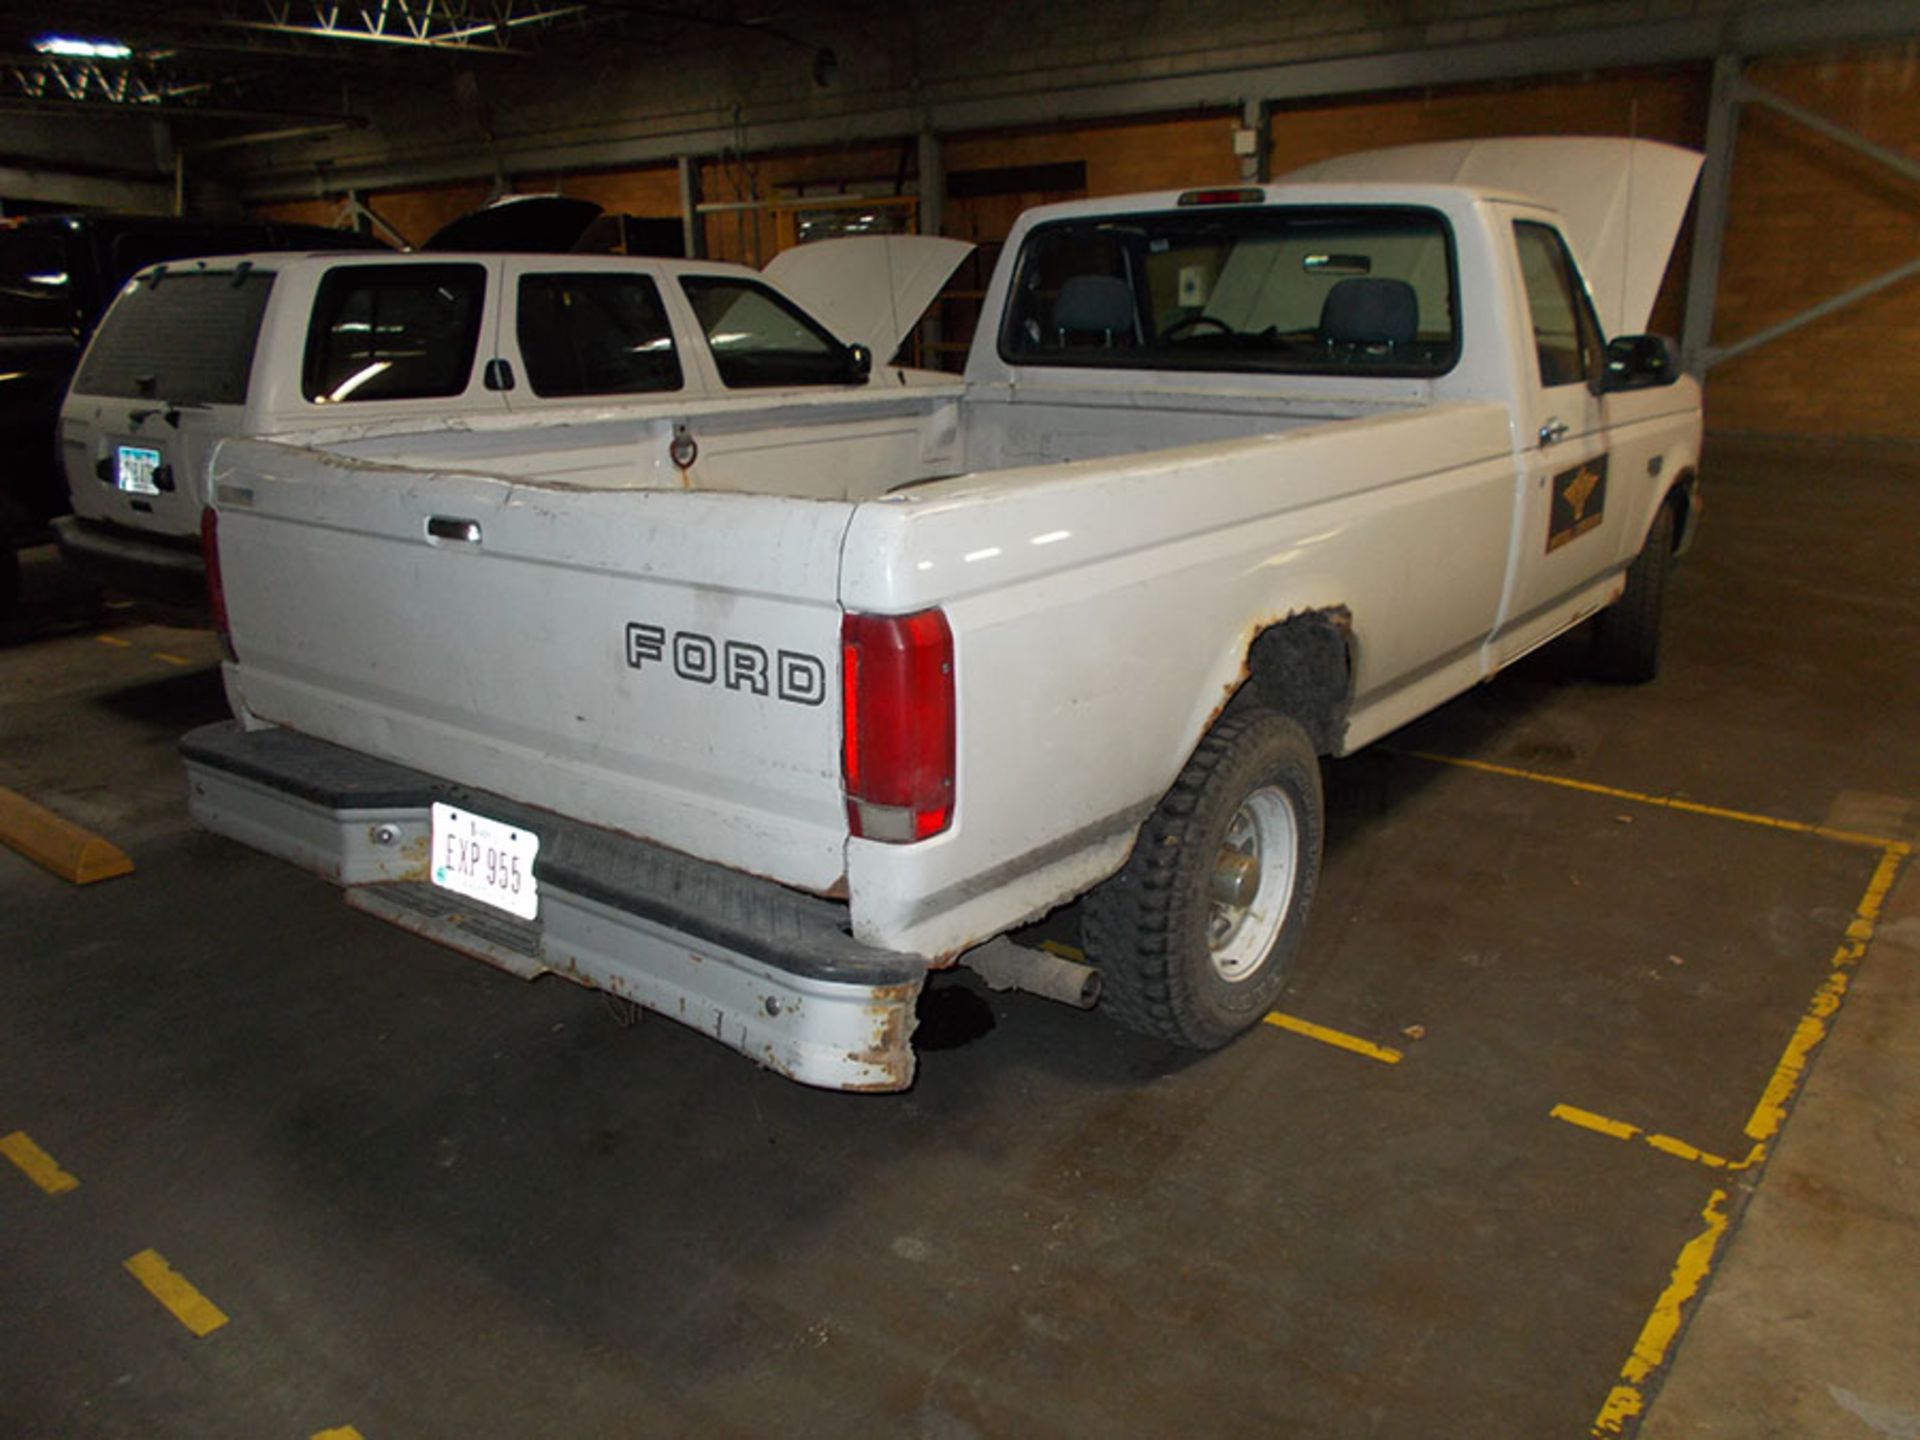 1995 FORD F150 XL STANDARD CAB 2-WHEEL DRIVE TRUCK; 199,824 MILES, VIN 1FTDF15Y45LB06506, 4.9 LITER, - Image 3 of 5